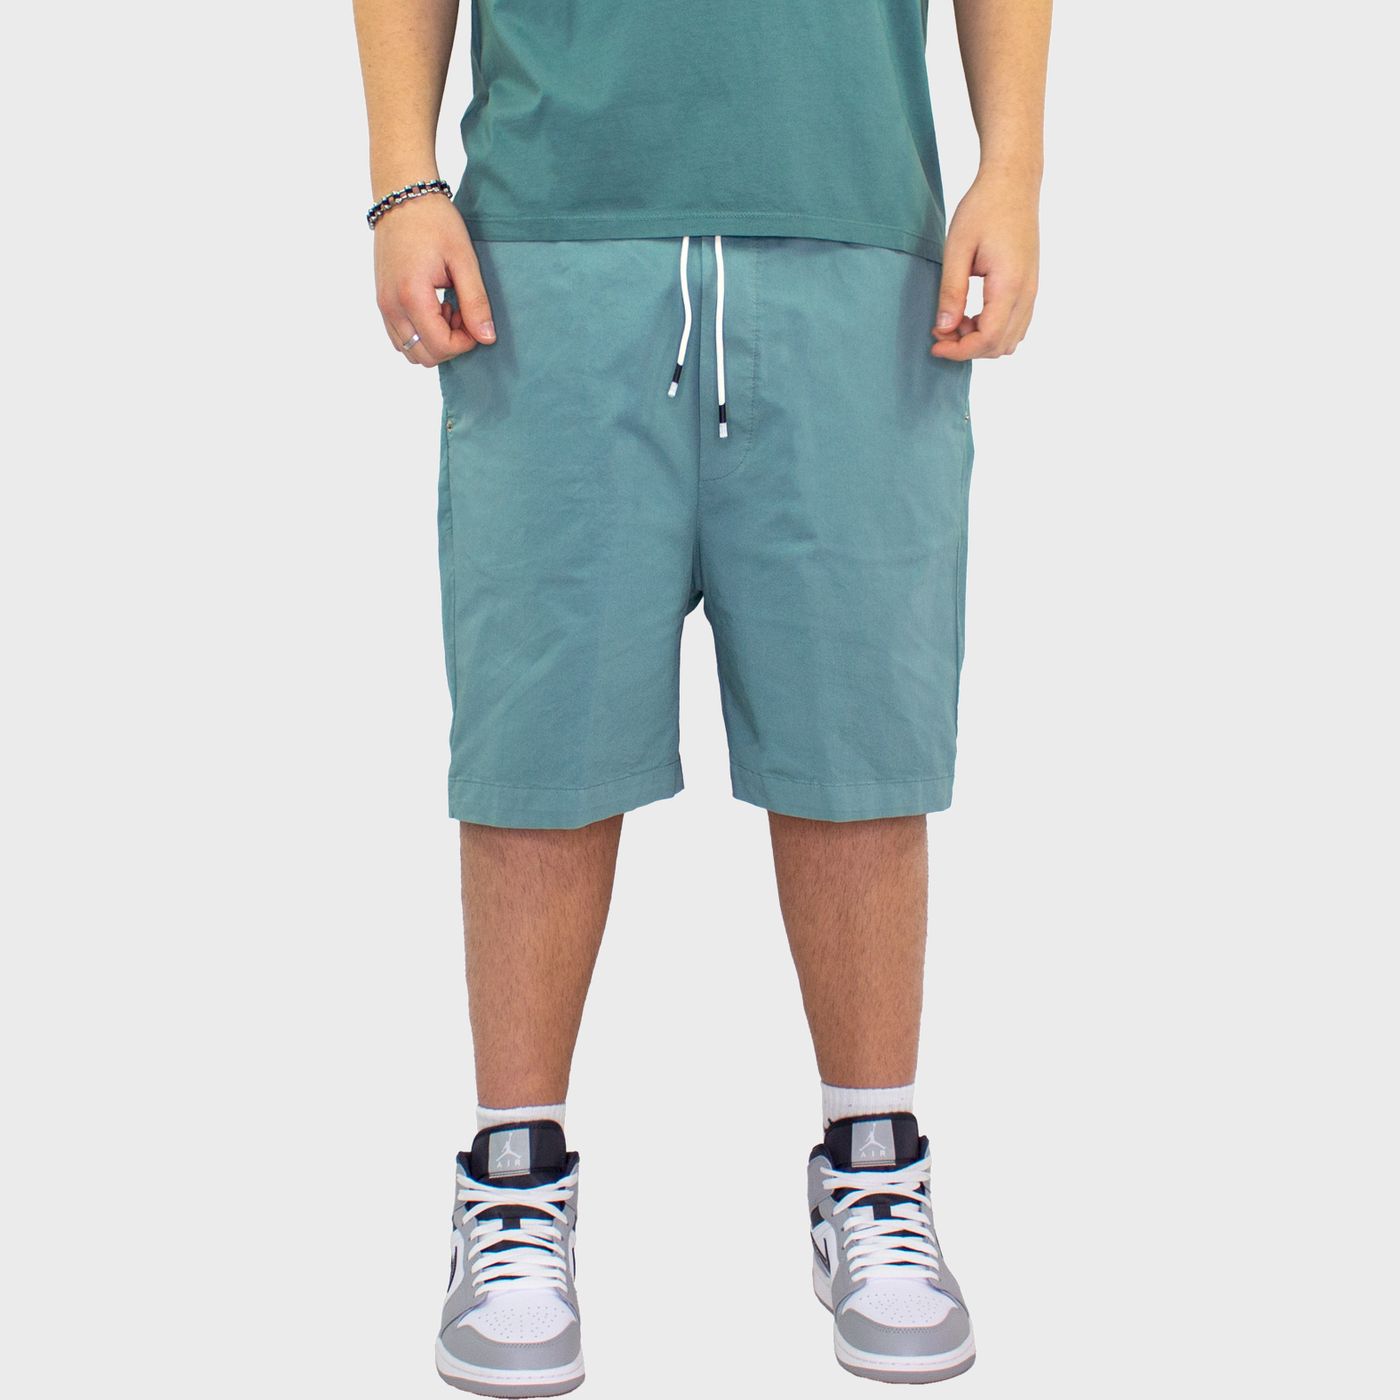 BR / 00502 - Shorts - WHITE OVER